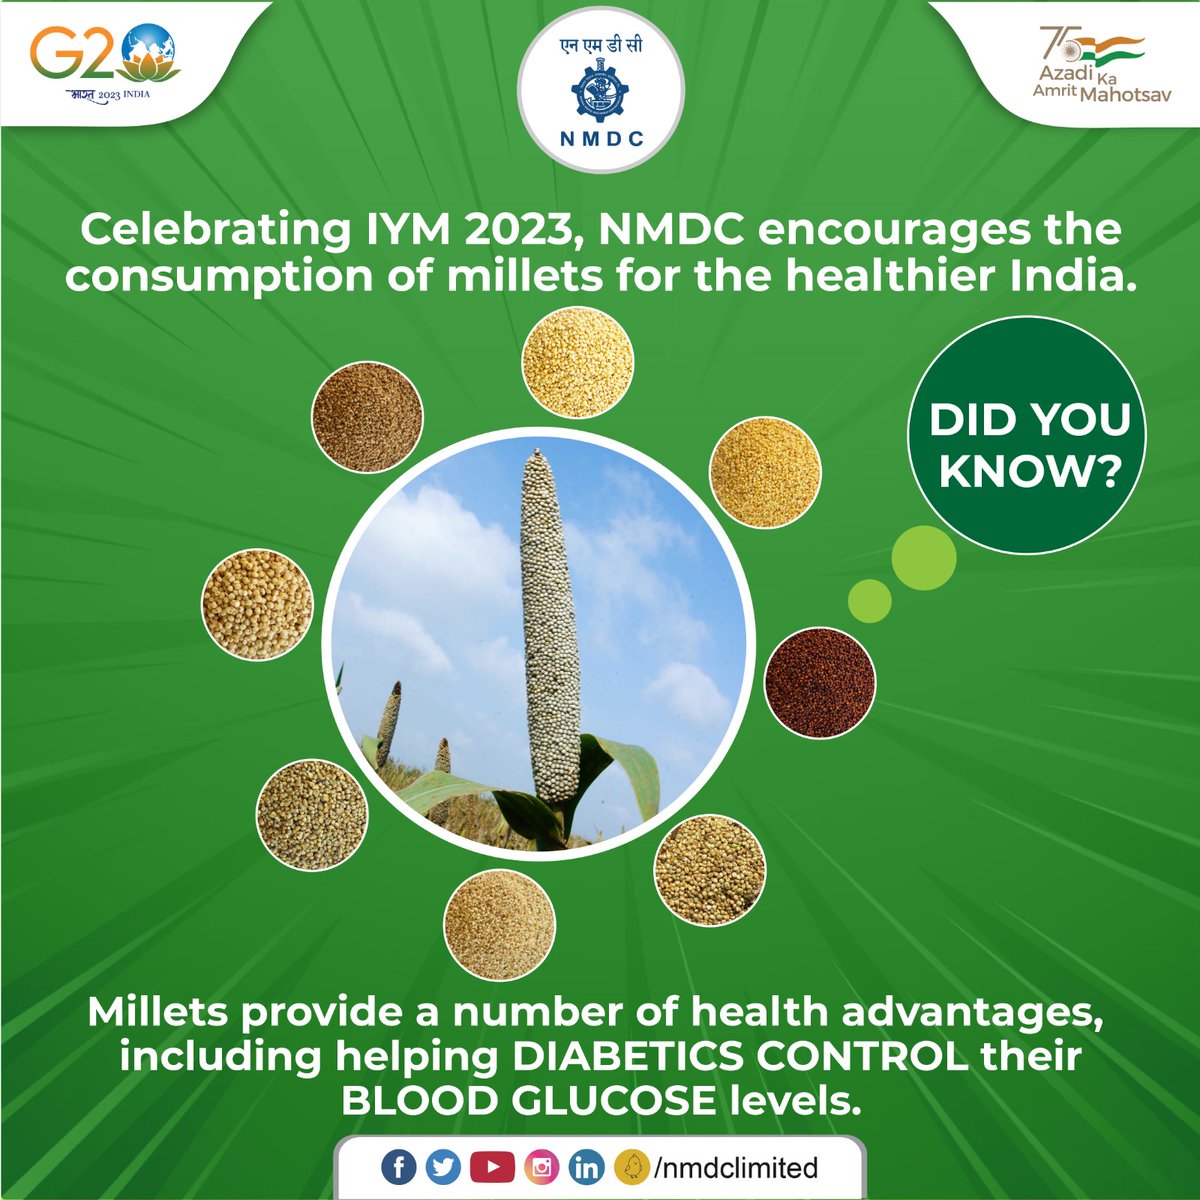 According to recent studies, ragi and other millets are a good option for diabetics since they include more fiber, minerals, and amino acids than white rice while also balancing blood sugar and cholesterol levels.

#NMDC #Milletfacts #InternationalYearOfMillets